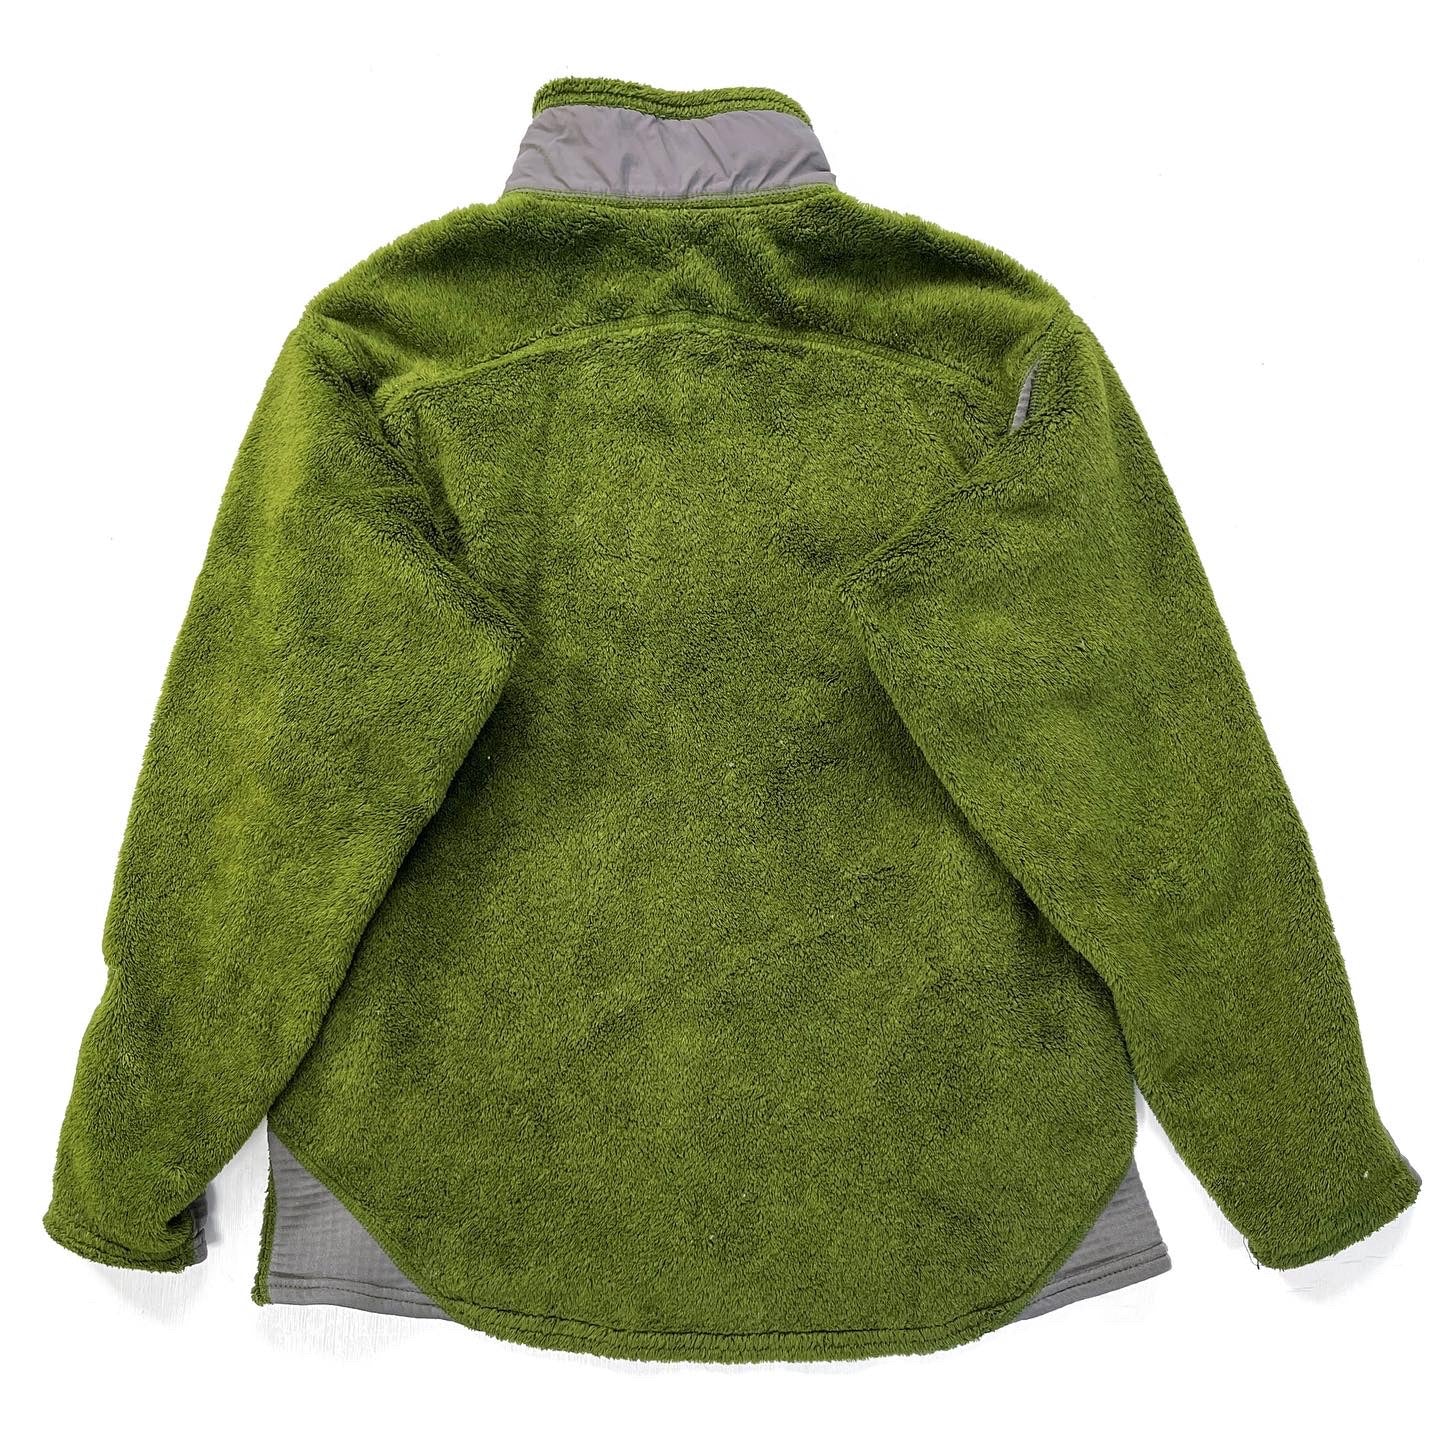 2003 Patagonia Made In The U.S.A. Mens R2 Fleece Jacket, Green (M)